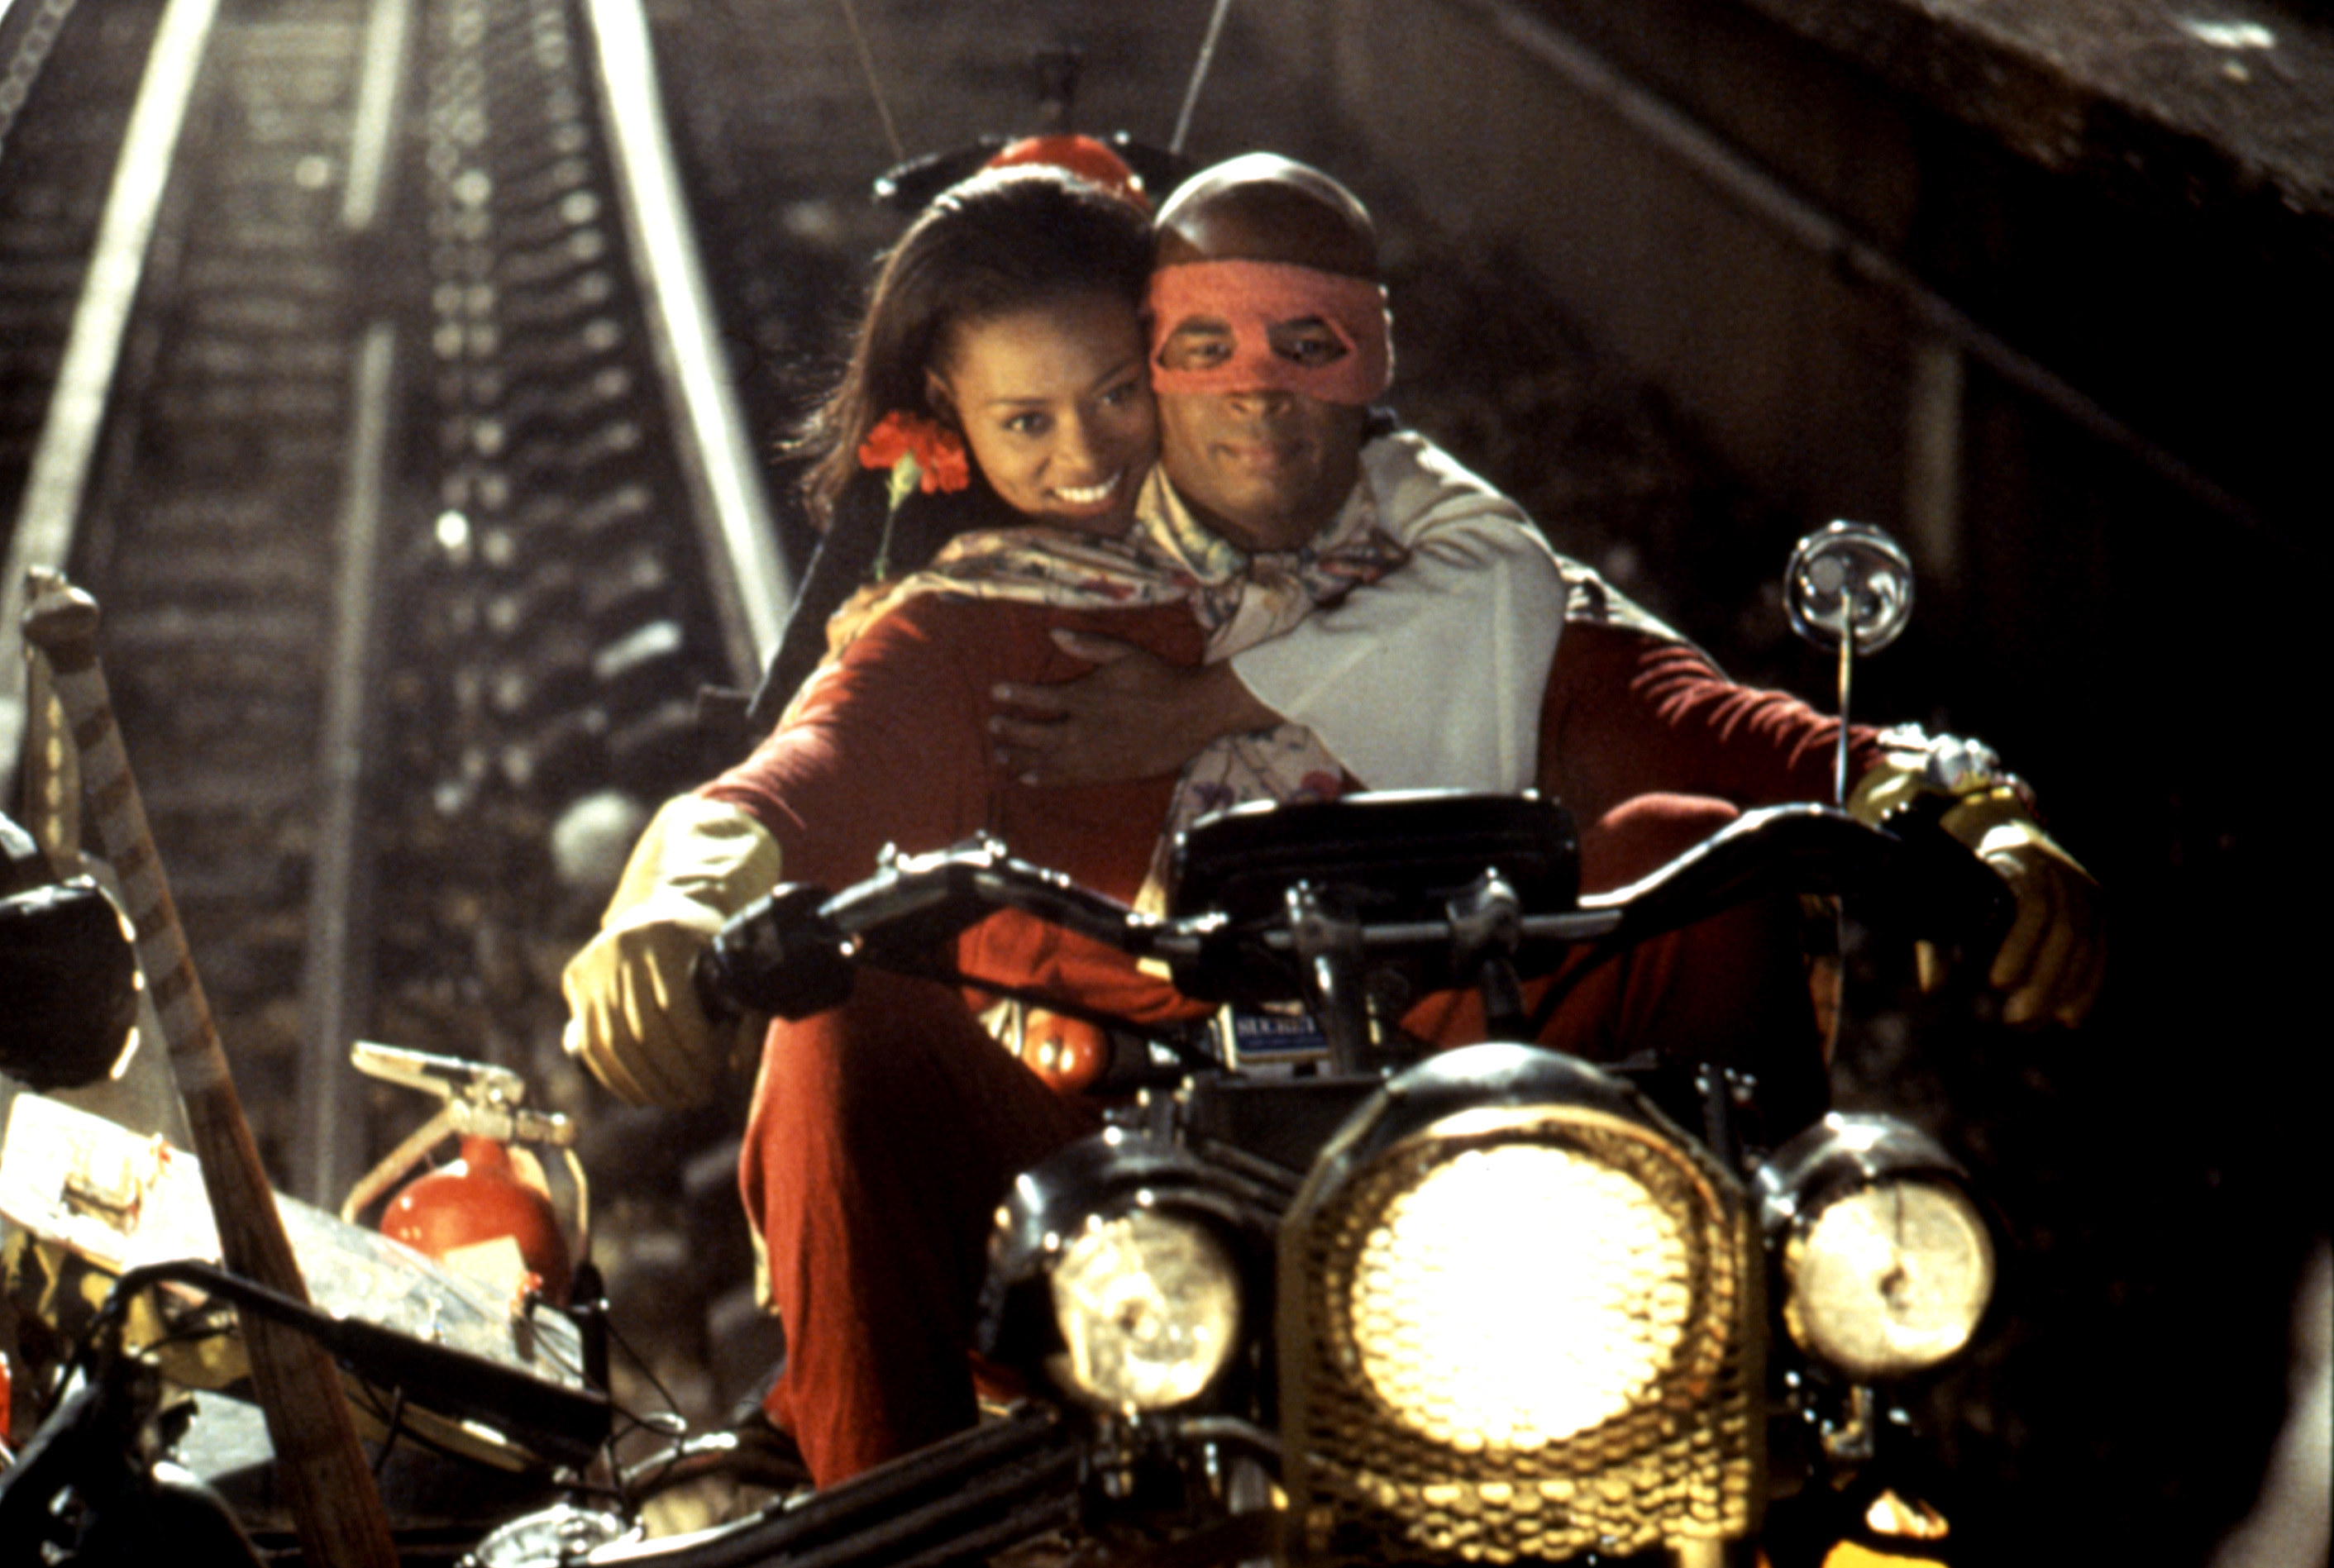 Robin Givens and Damon Wayans in “Blankman”